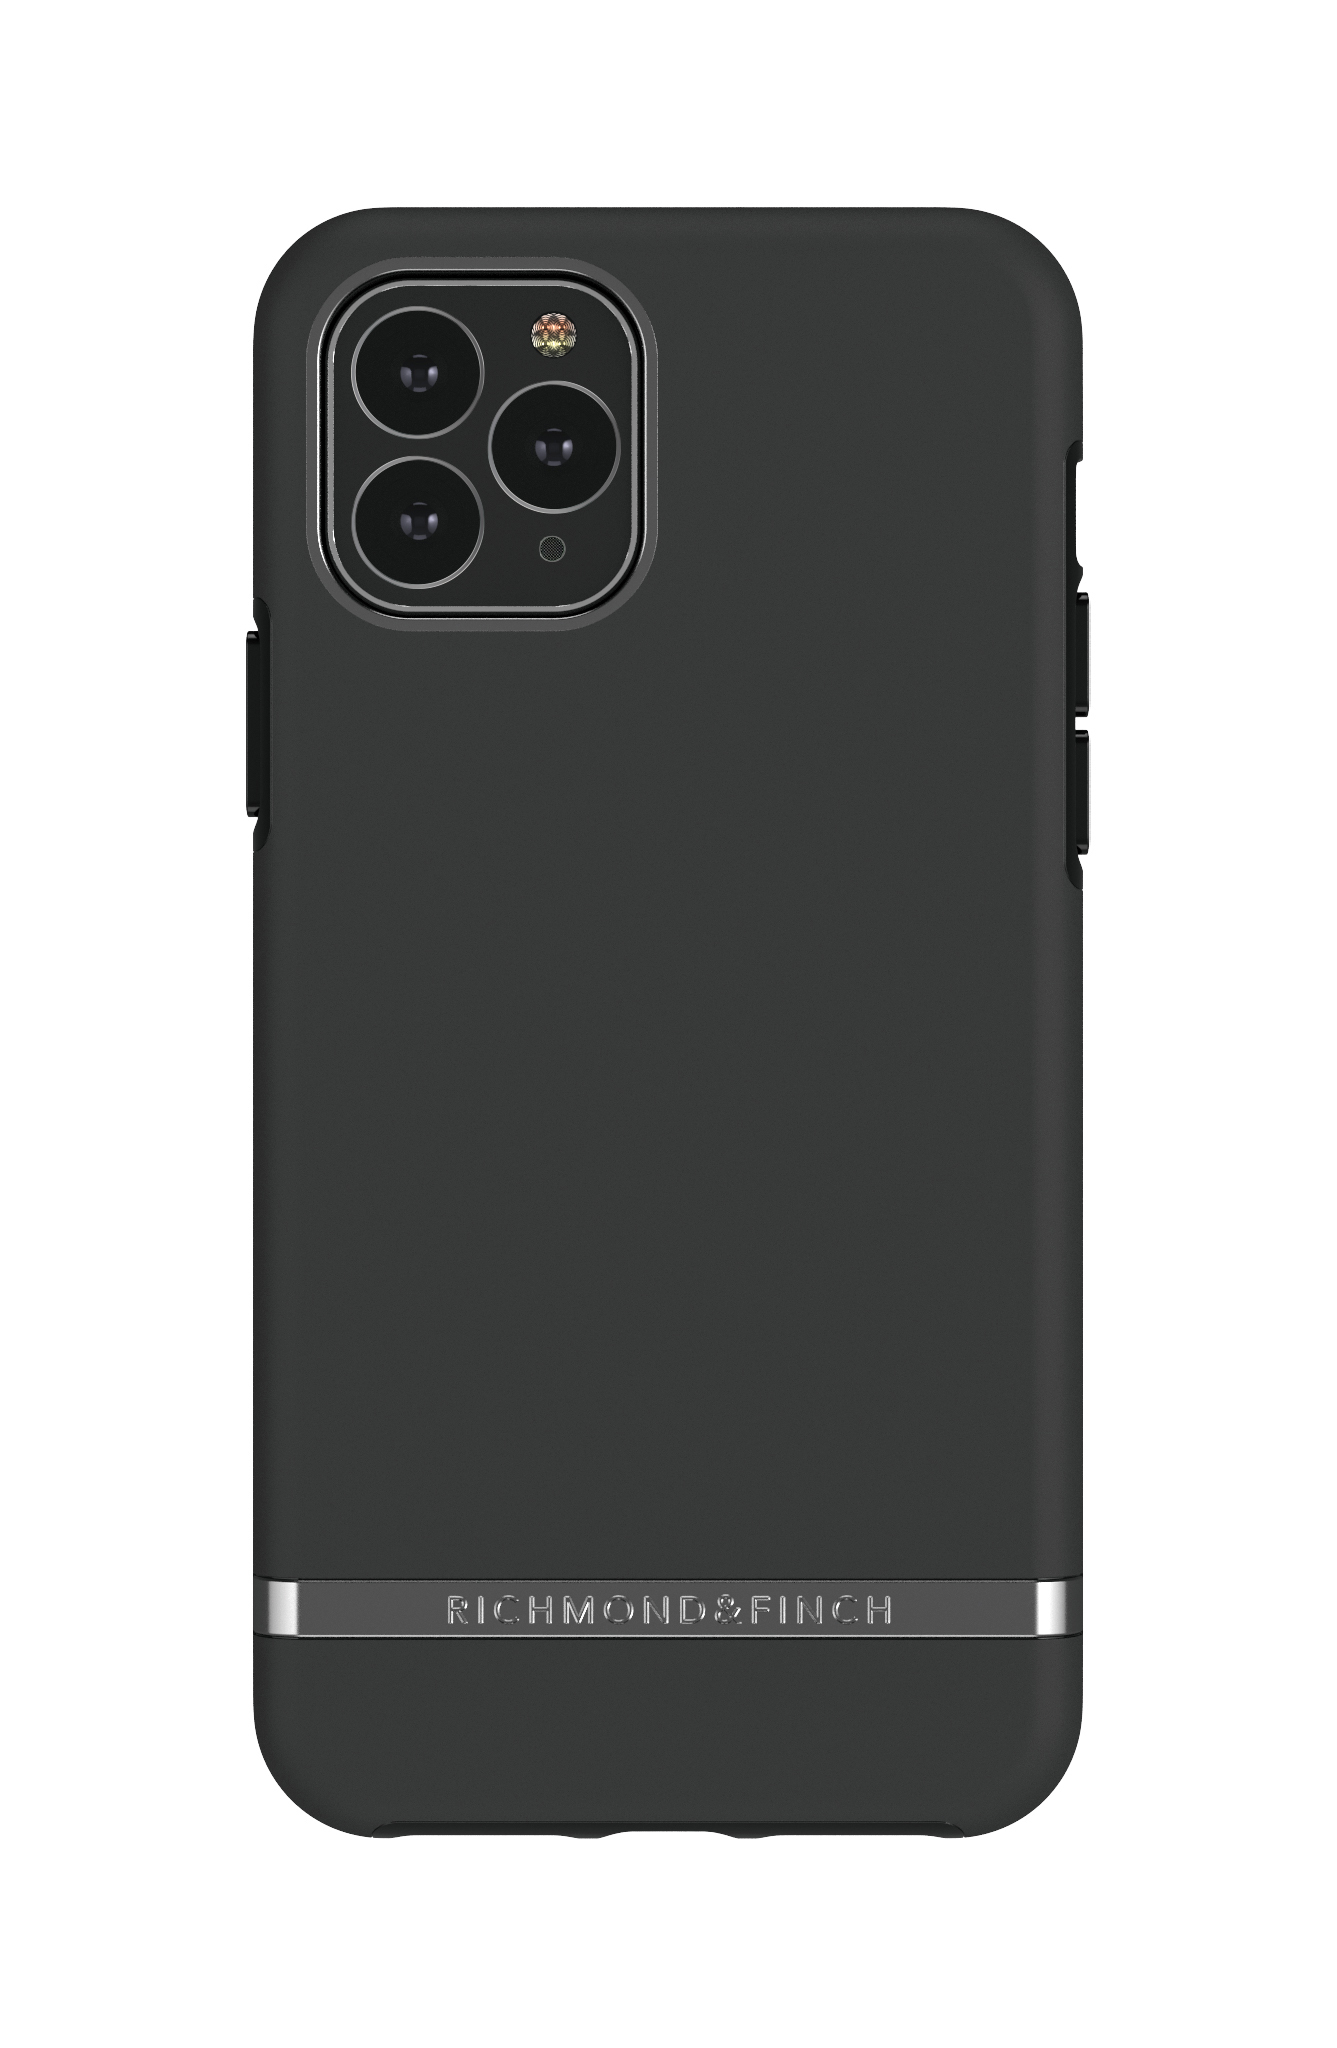 RICHMOND & FINCH Black Out IPHONE 11 APPLE, iPhone Pro, Backcover, 11 PRO, BLACK